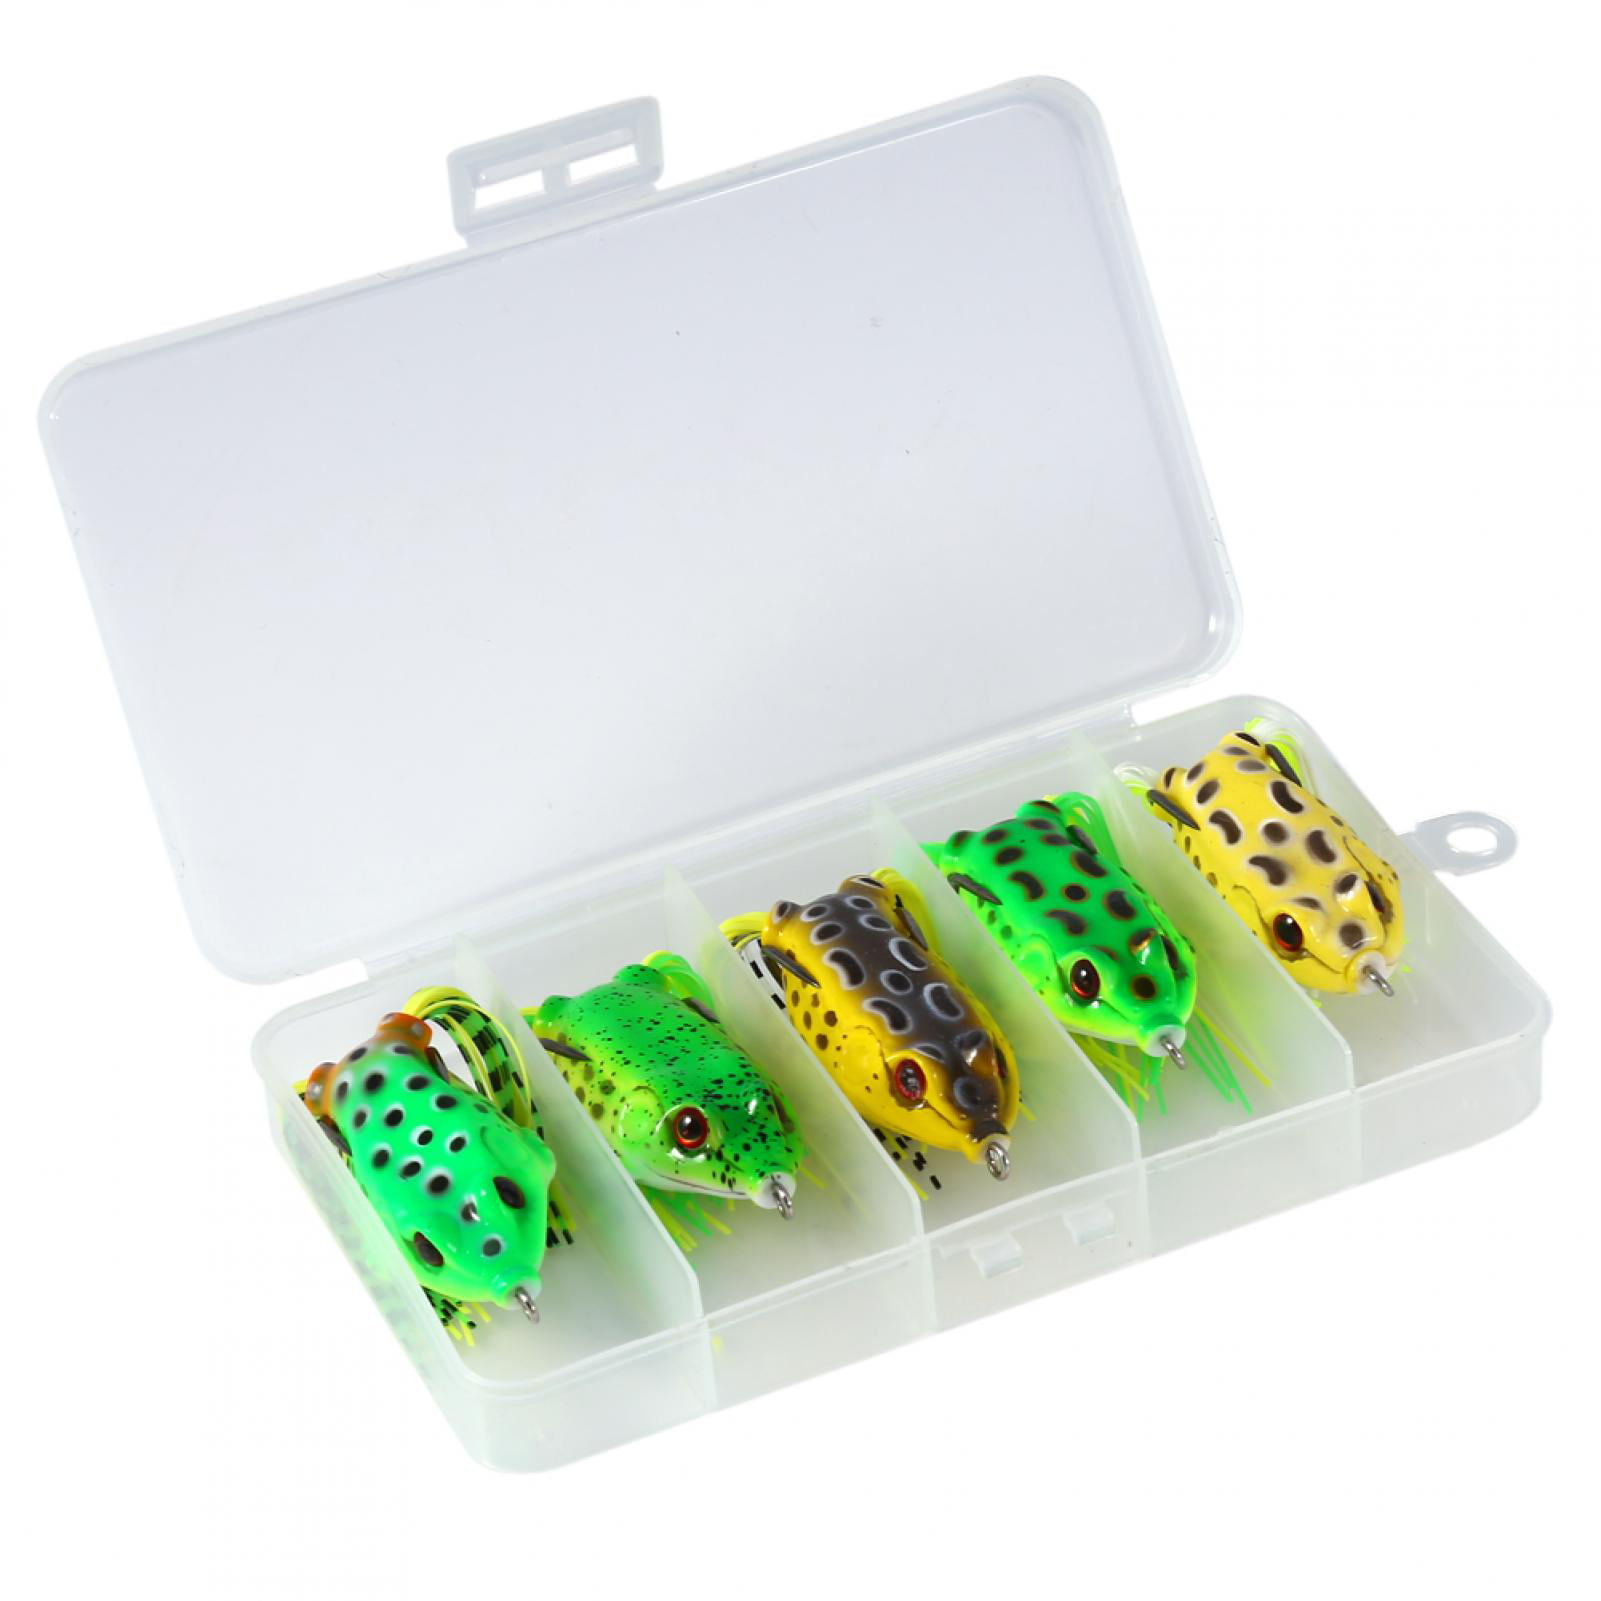 5pcs//Box Bionic Frog Baits Colorful Fishing Lures Crank Bait Hook Tackle Bait for Outdoor Fishing